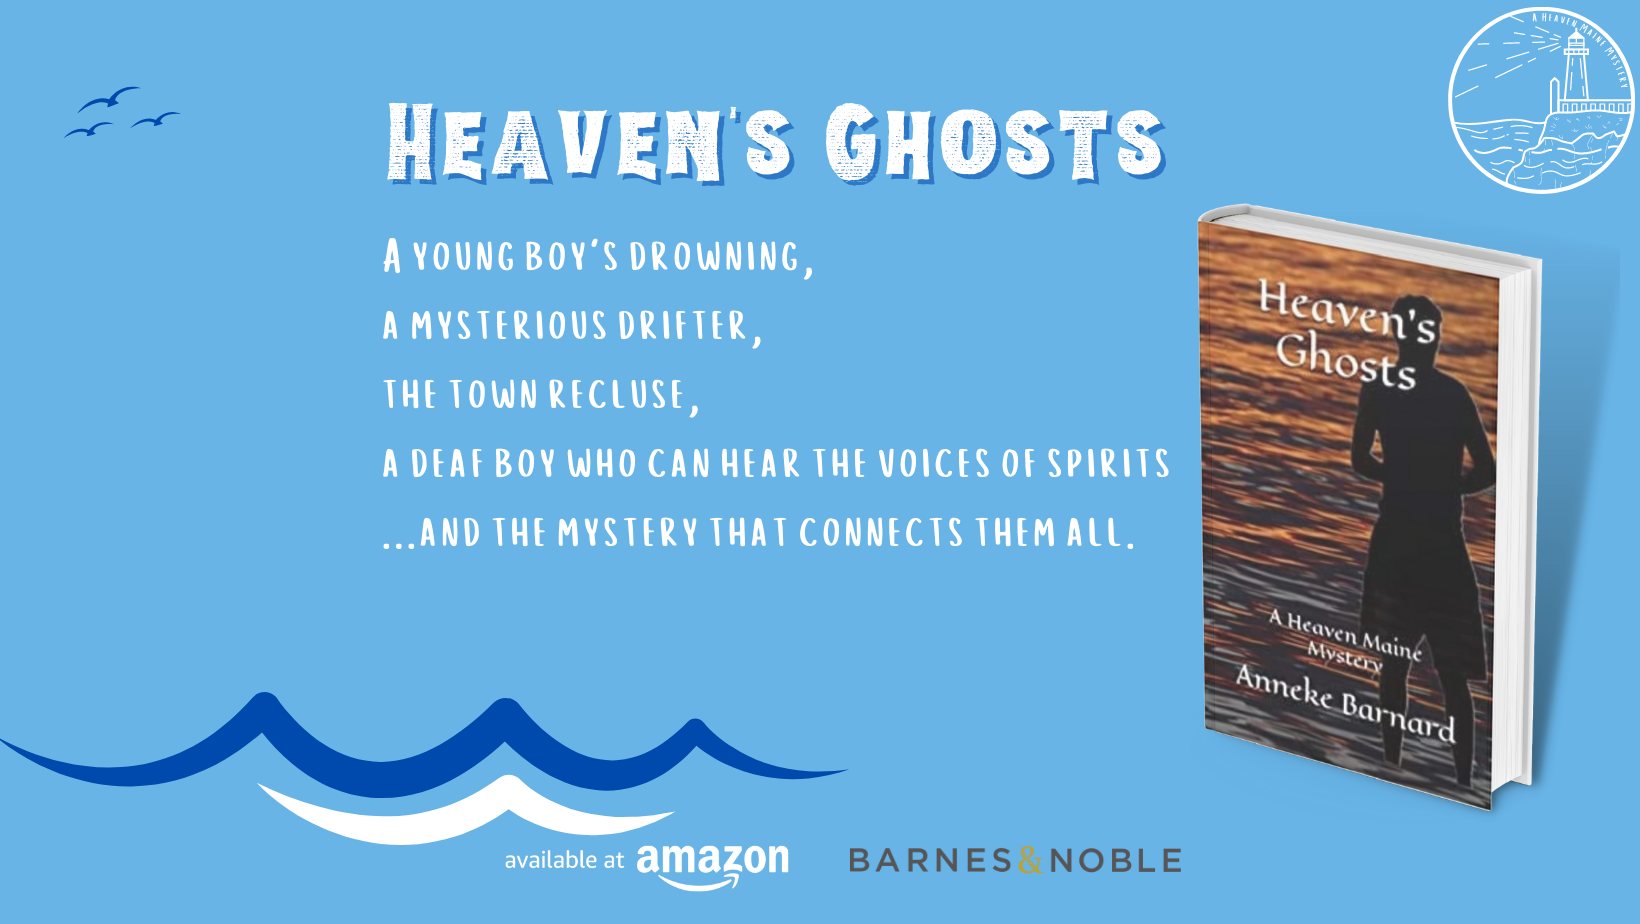 An infographic for Heaven's Ghosts by Anneke Barnard